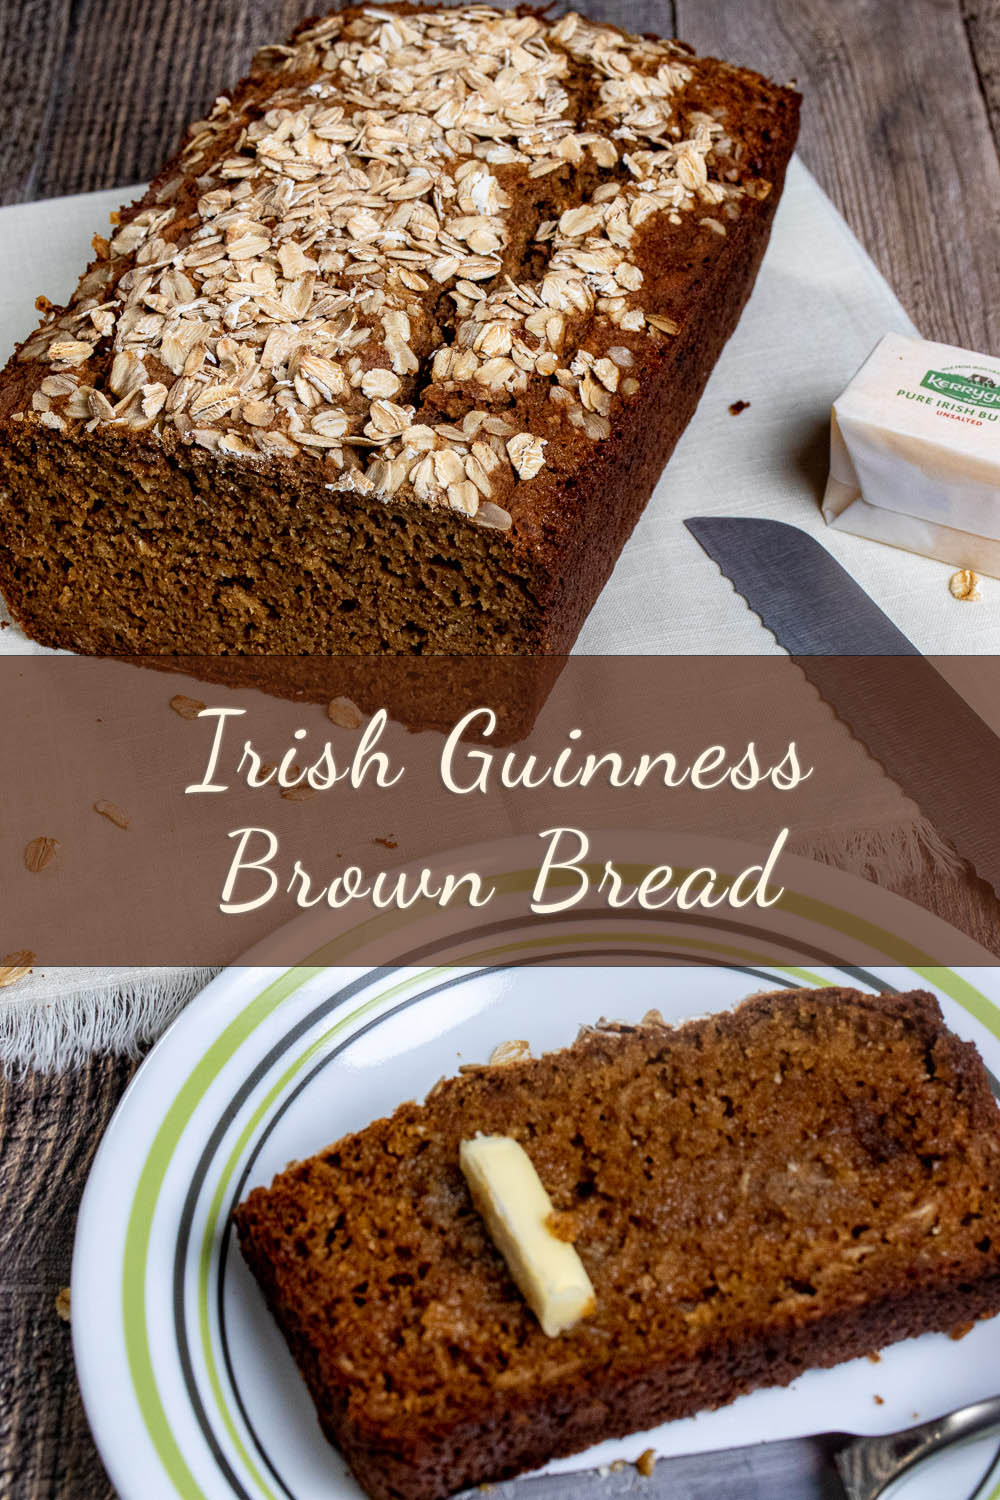 Irish Guinness brown bread on white linen and a buttered slice on a plate in the foreground